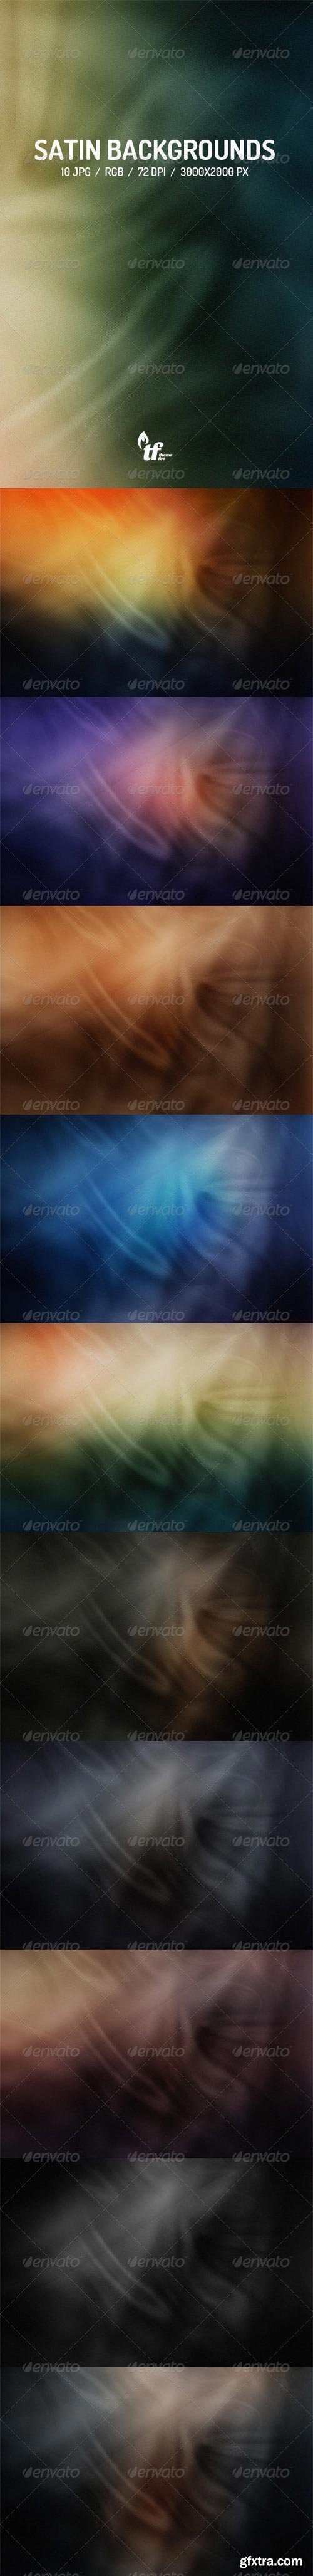 GraphicRiver - Satin Backgrounds 7522669